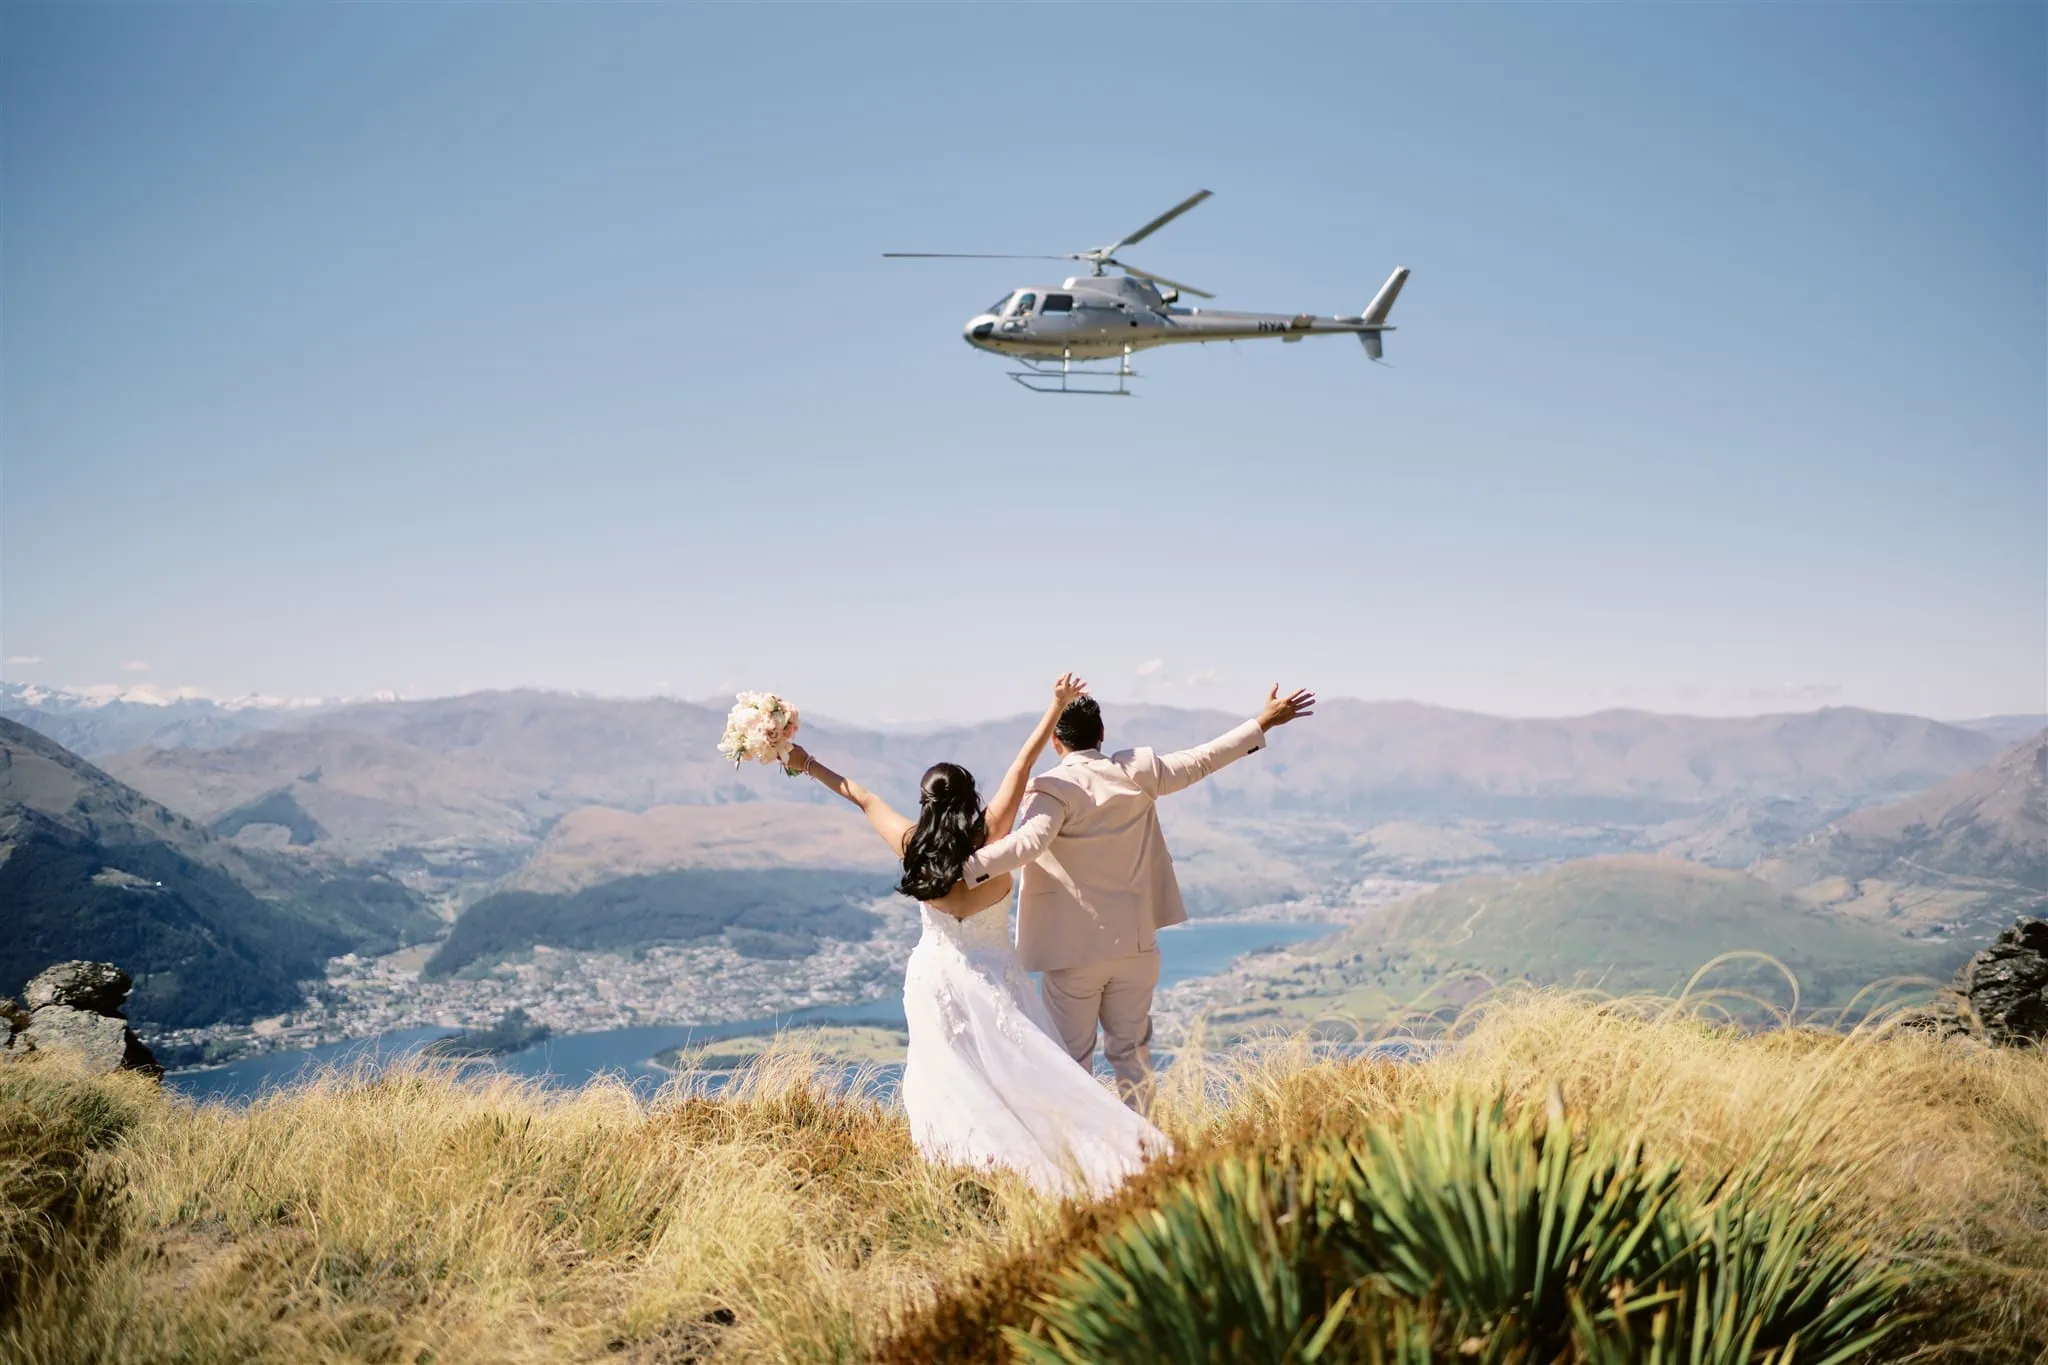 Queenstown Elopement Heli Wedding Photographer クイーンズタウン結婚式 | A Queenstown elopement with a bride and groom standing on a hill, capturing the breathtaking scenery as a helicopter flies in the sky.